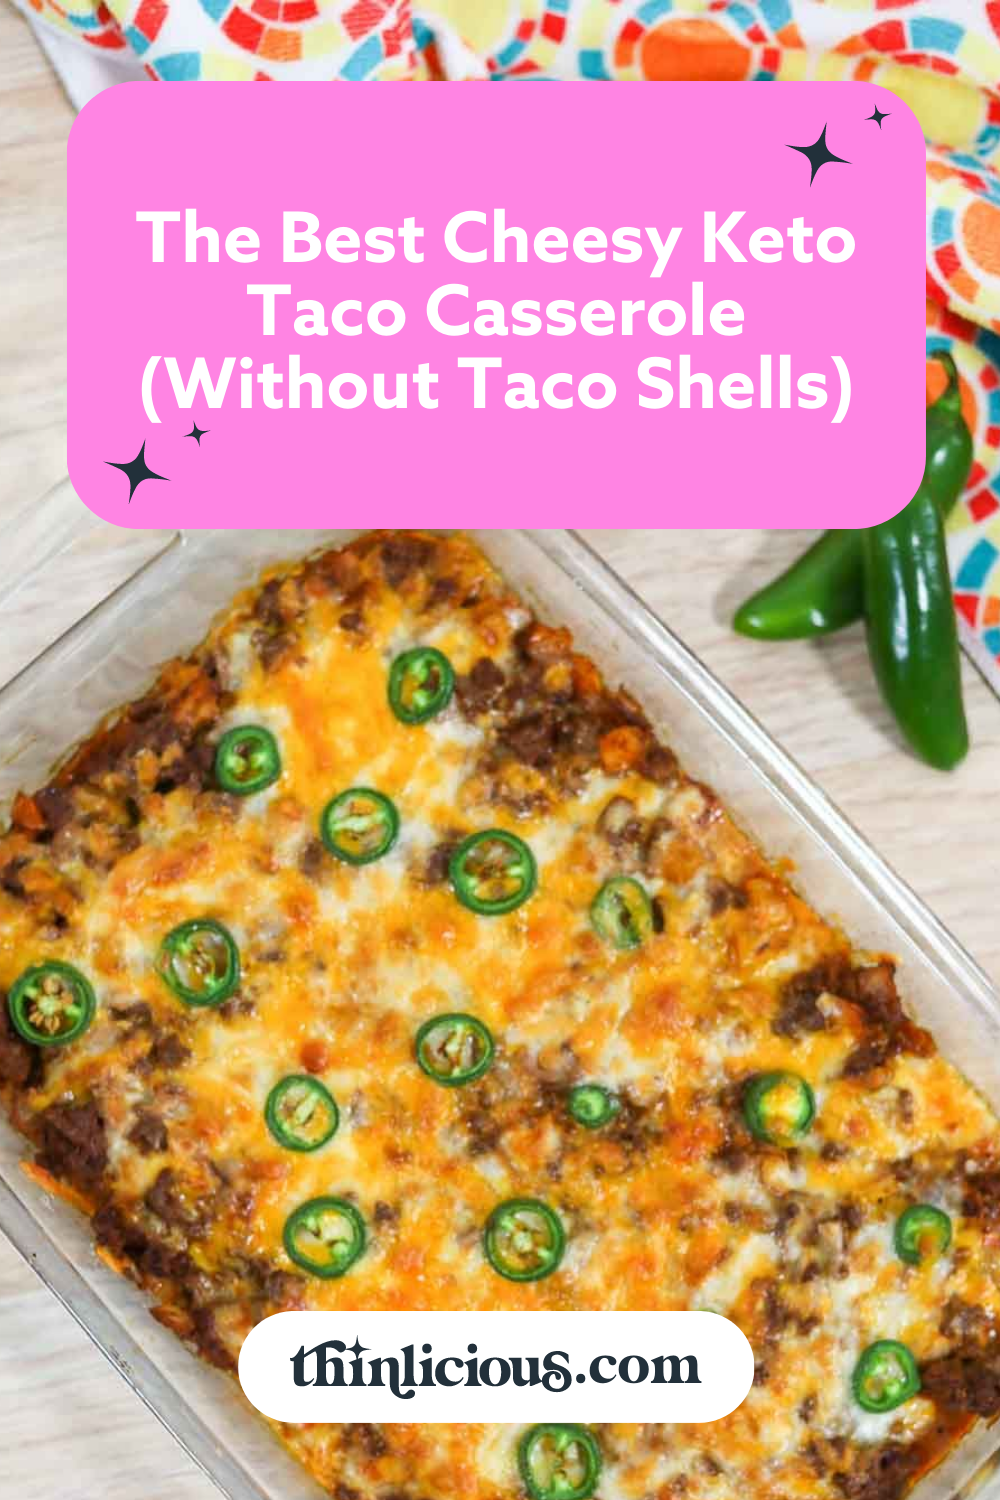 The Best Cheesy Keto Taco Casserole (Without Taco Shells) - Thinlicious